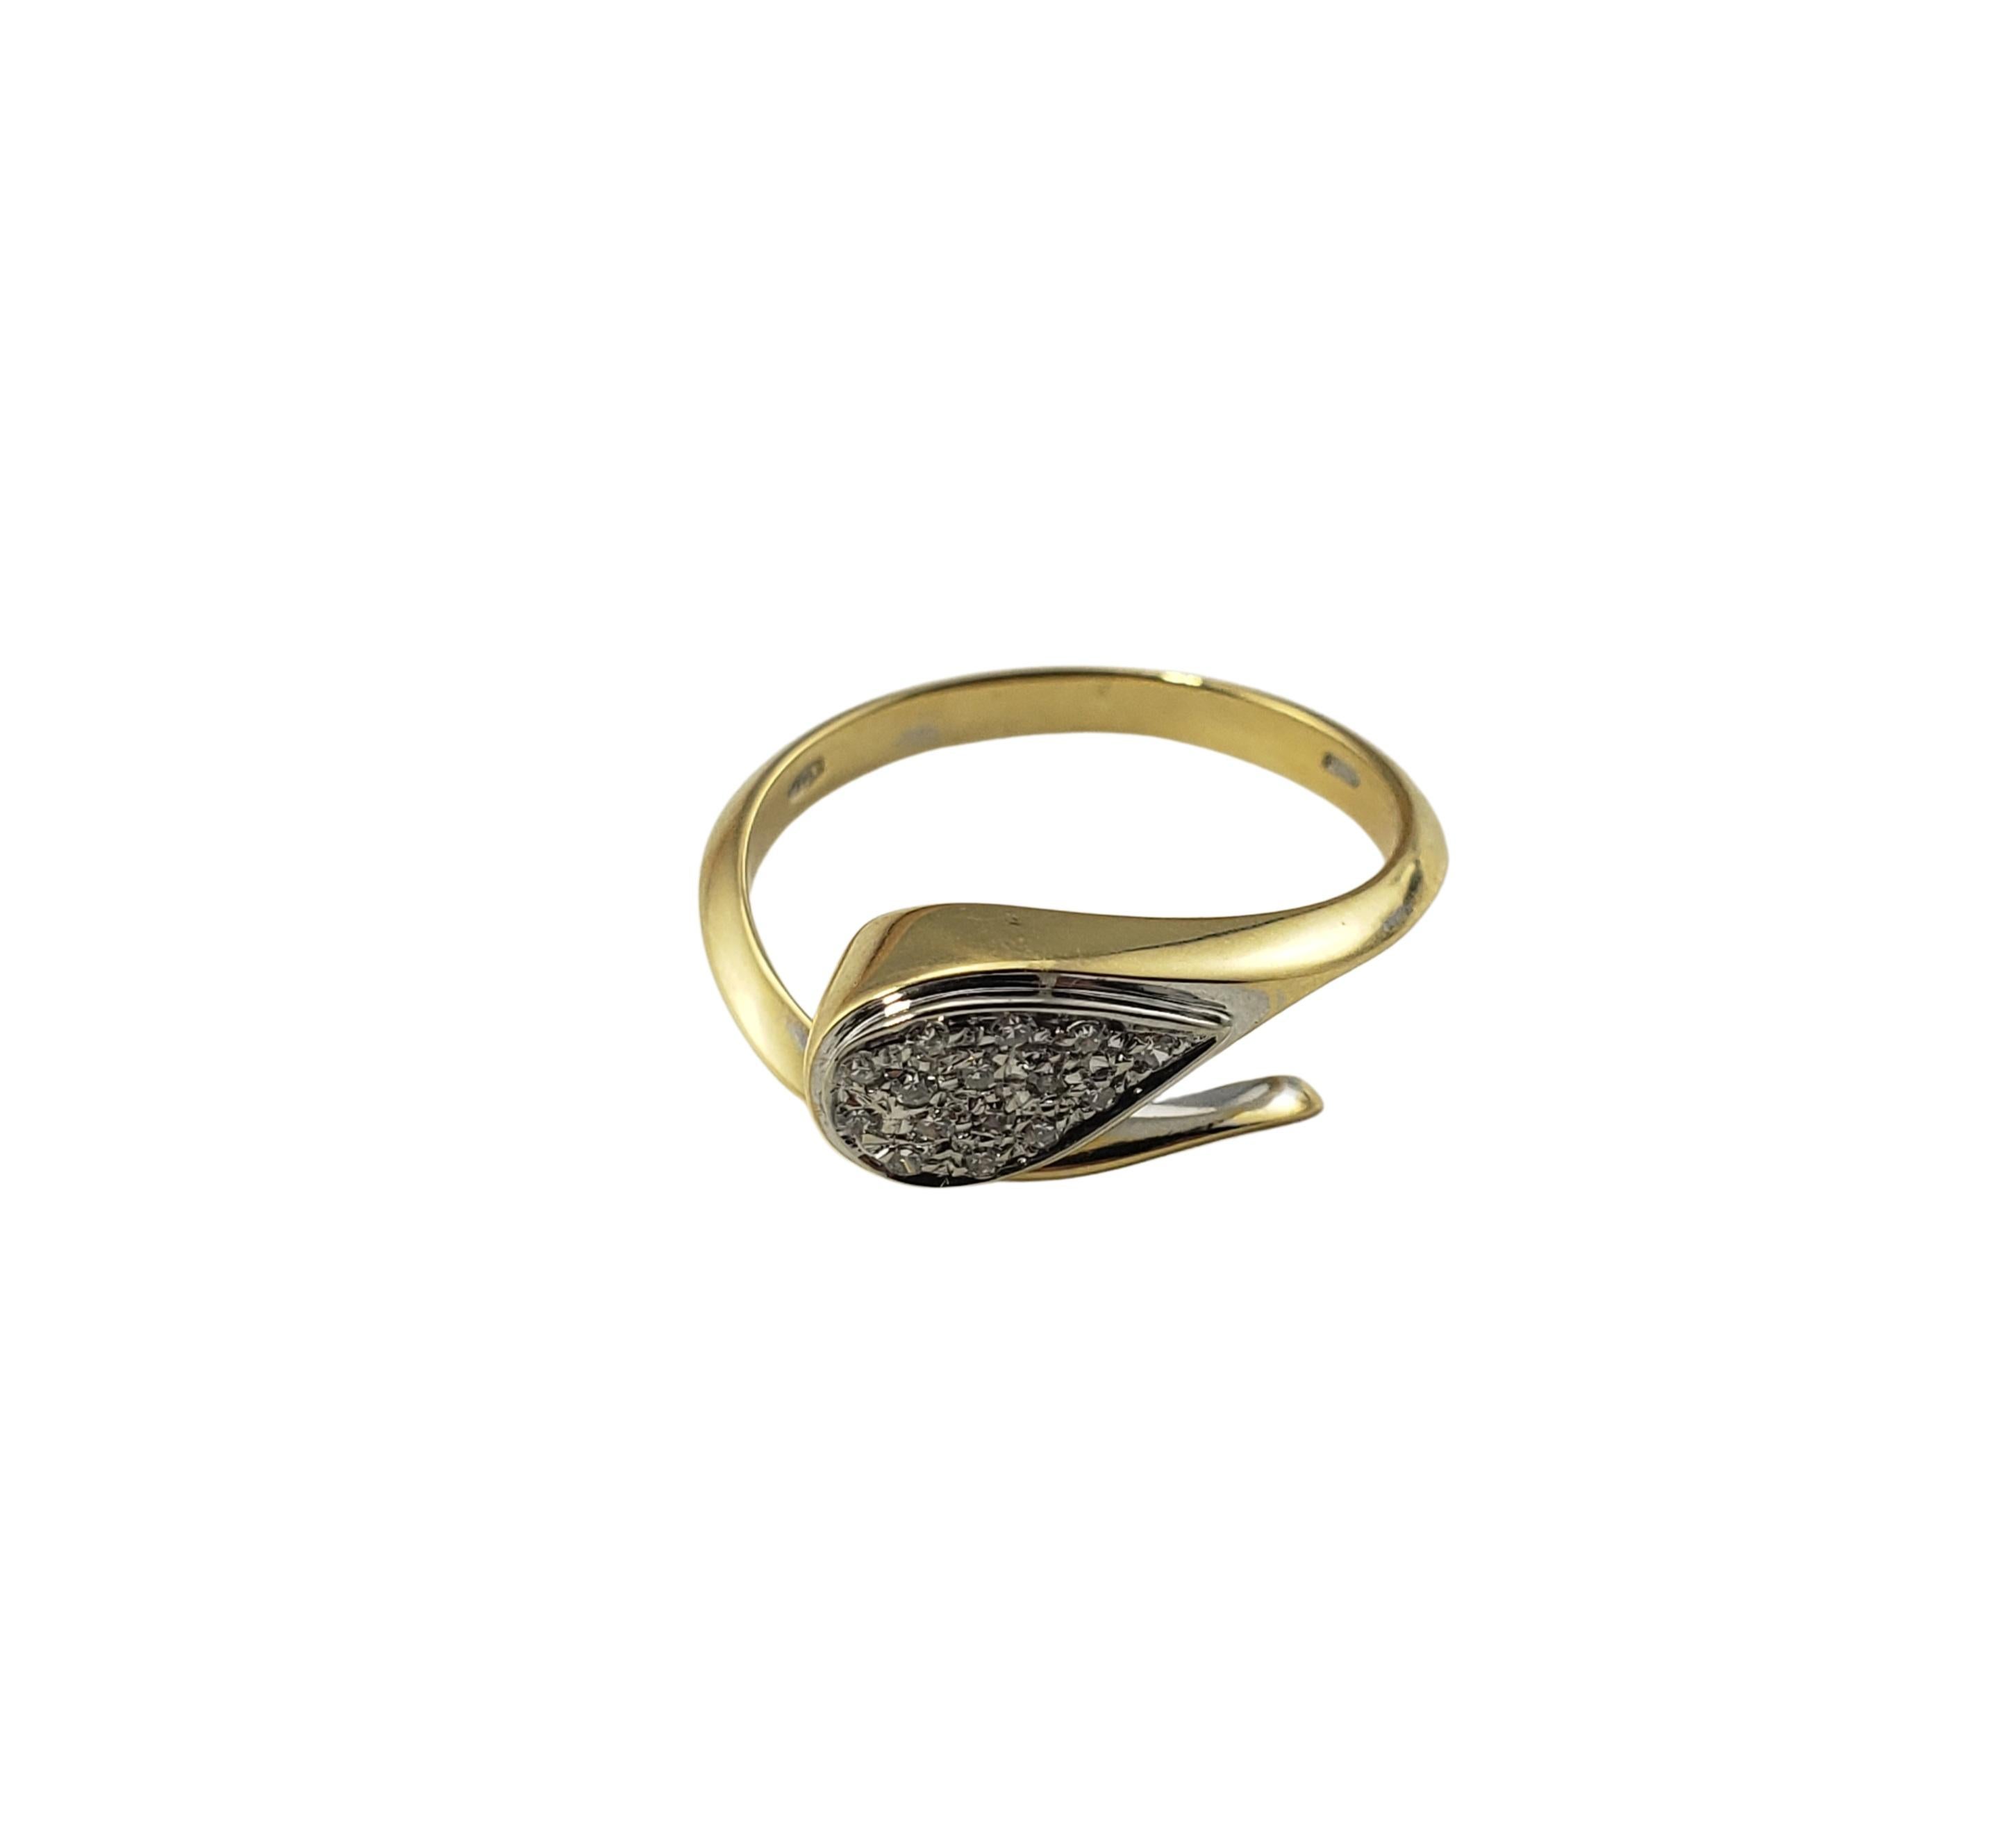 Vintage 14 Karat Yellow Gold and Diamond Snake Ring Size 7.25-

This sparkling snake ring features 15 round single cut diamonds set in classic 14K yellow gold. Width: 9 mm Shank: 2 mm.

Approximate total diamond weight: .08 ct.

Diamond color: